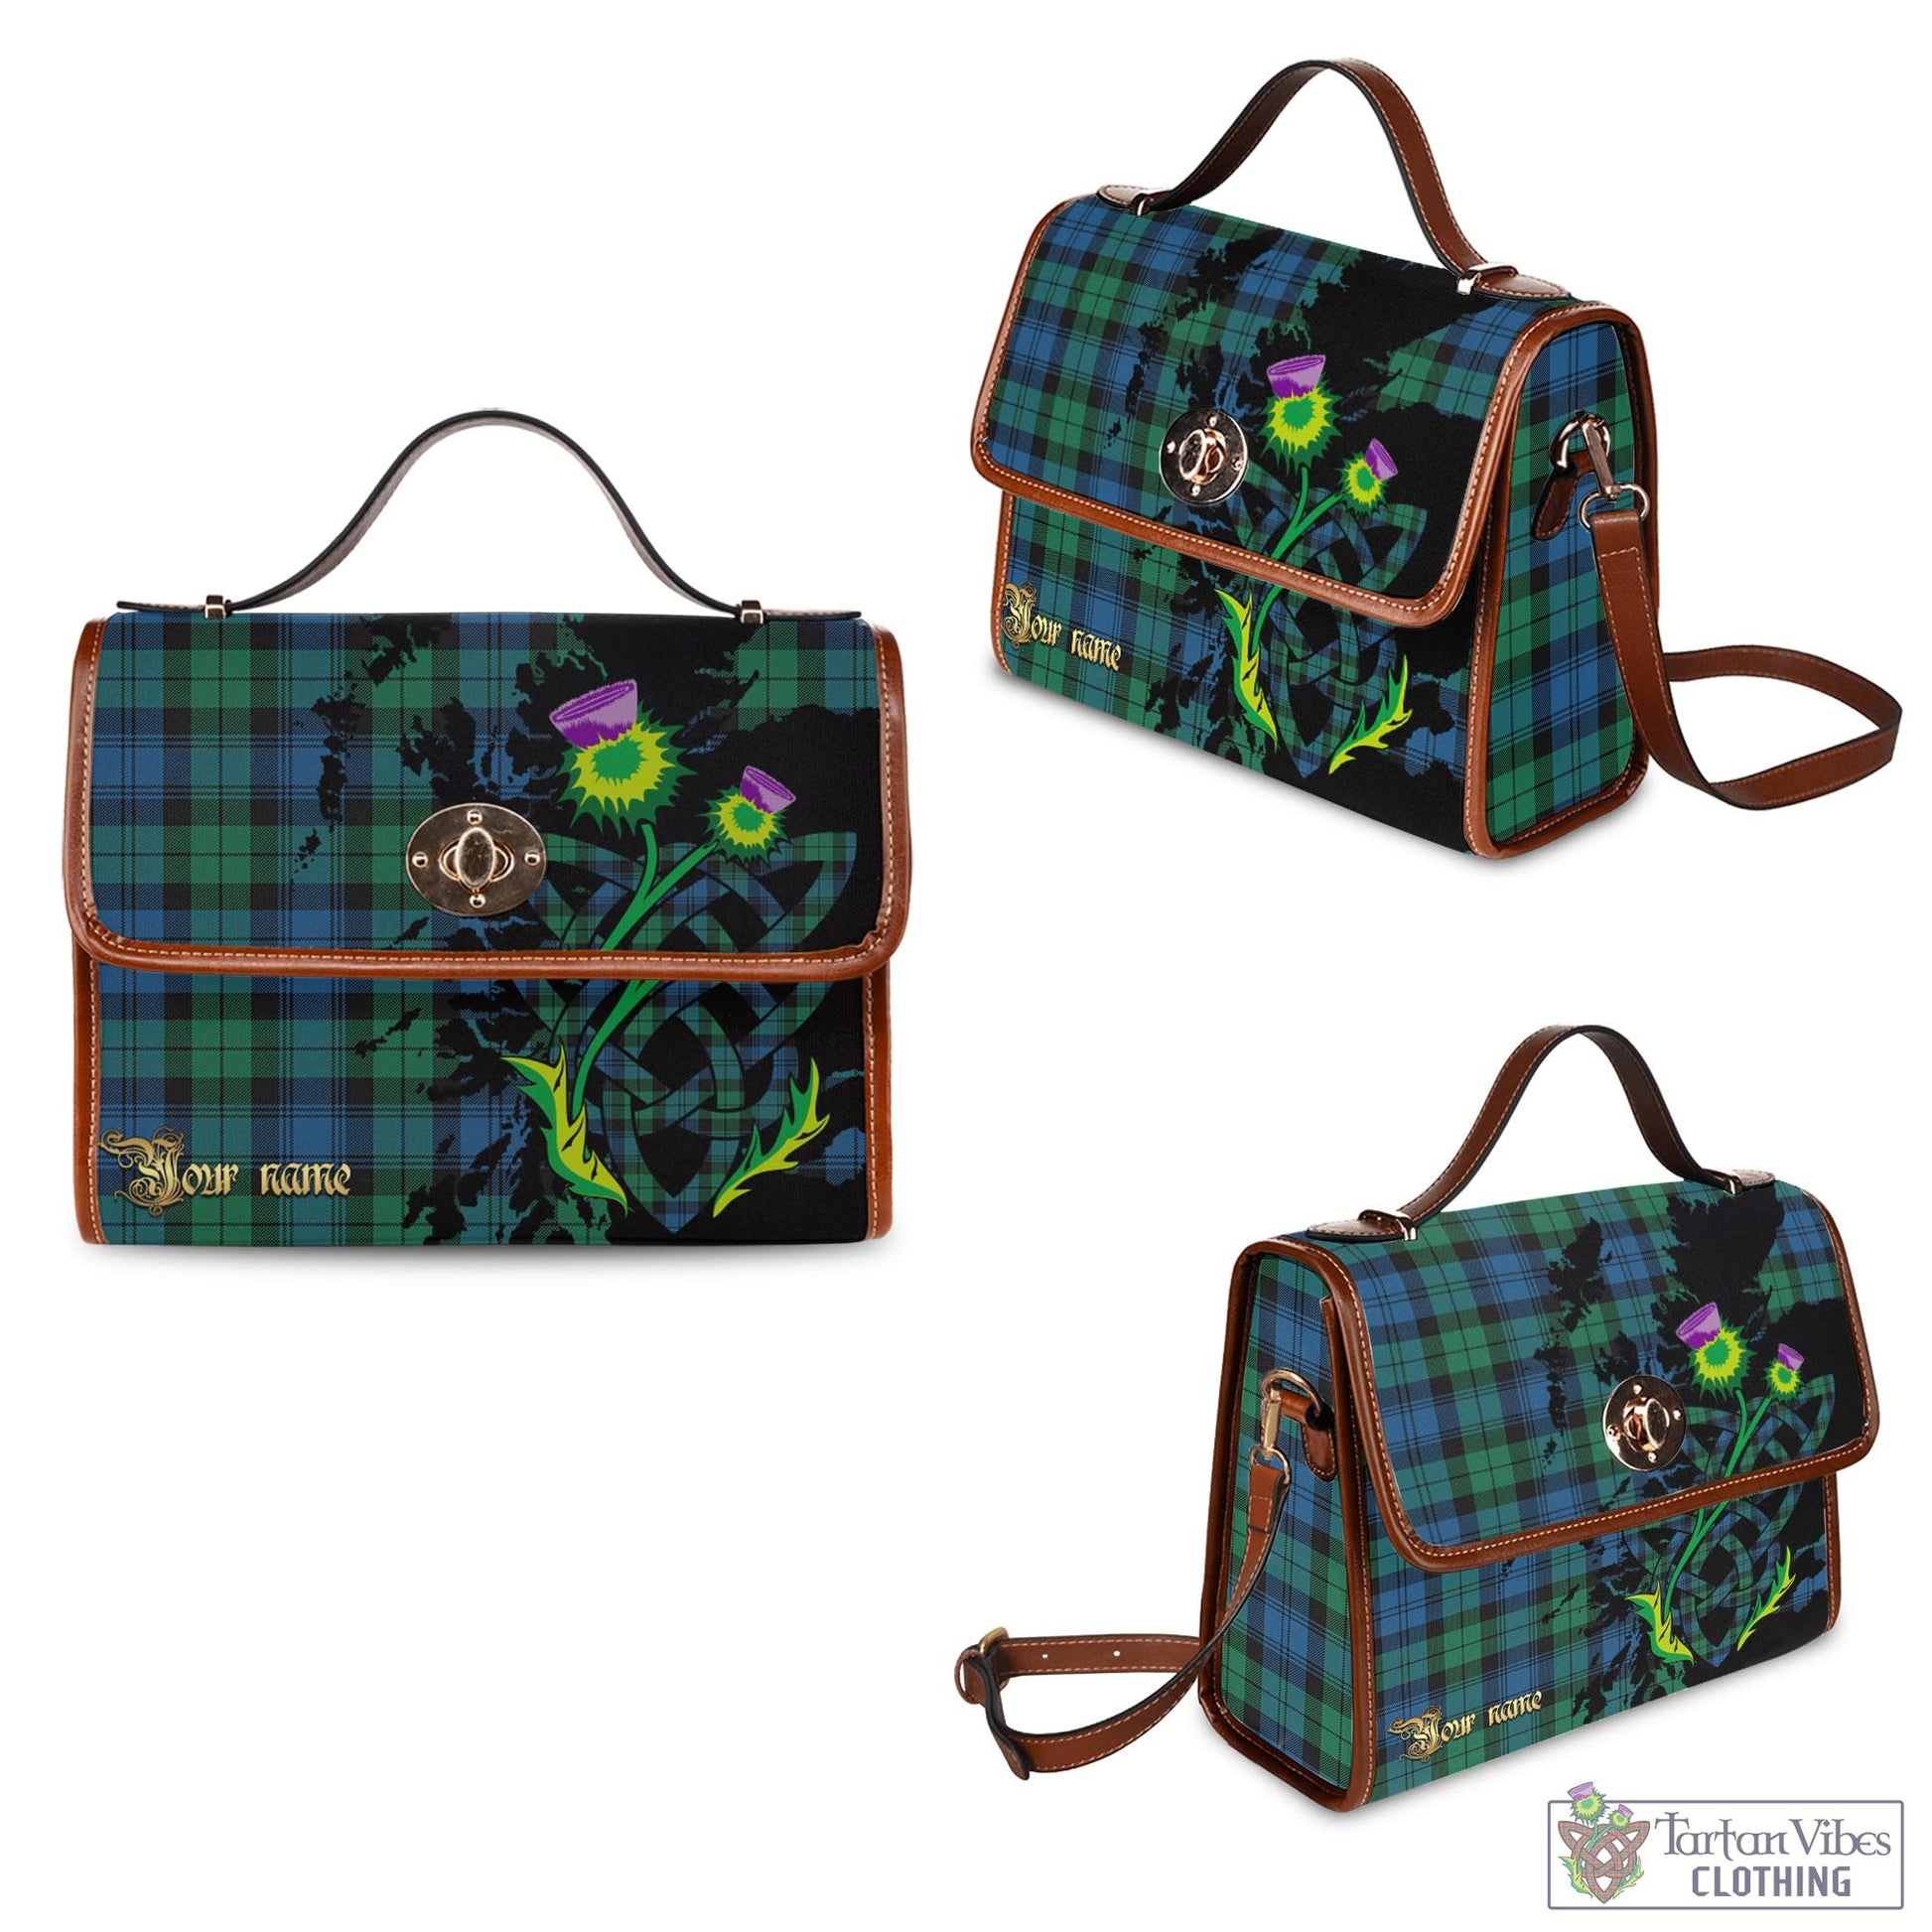 Tartan Vibes Clothing Black Watch Ancient Tartan Waterproof Canvas Bag with Scotland Map and Thistle Celtic Accents